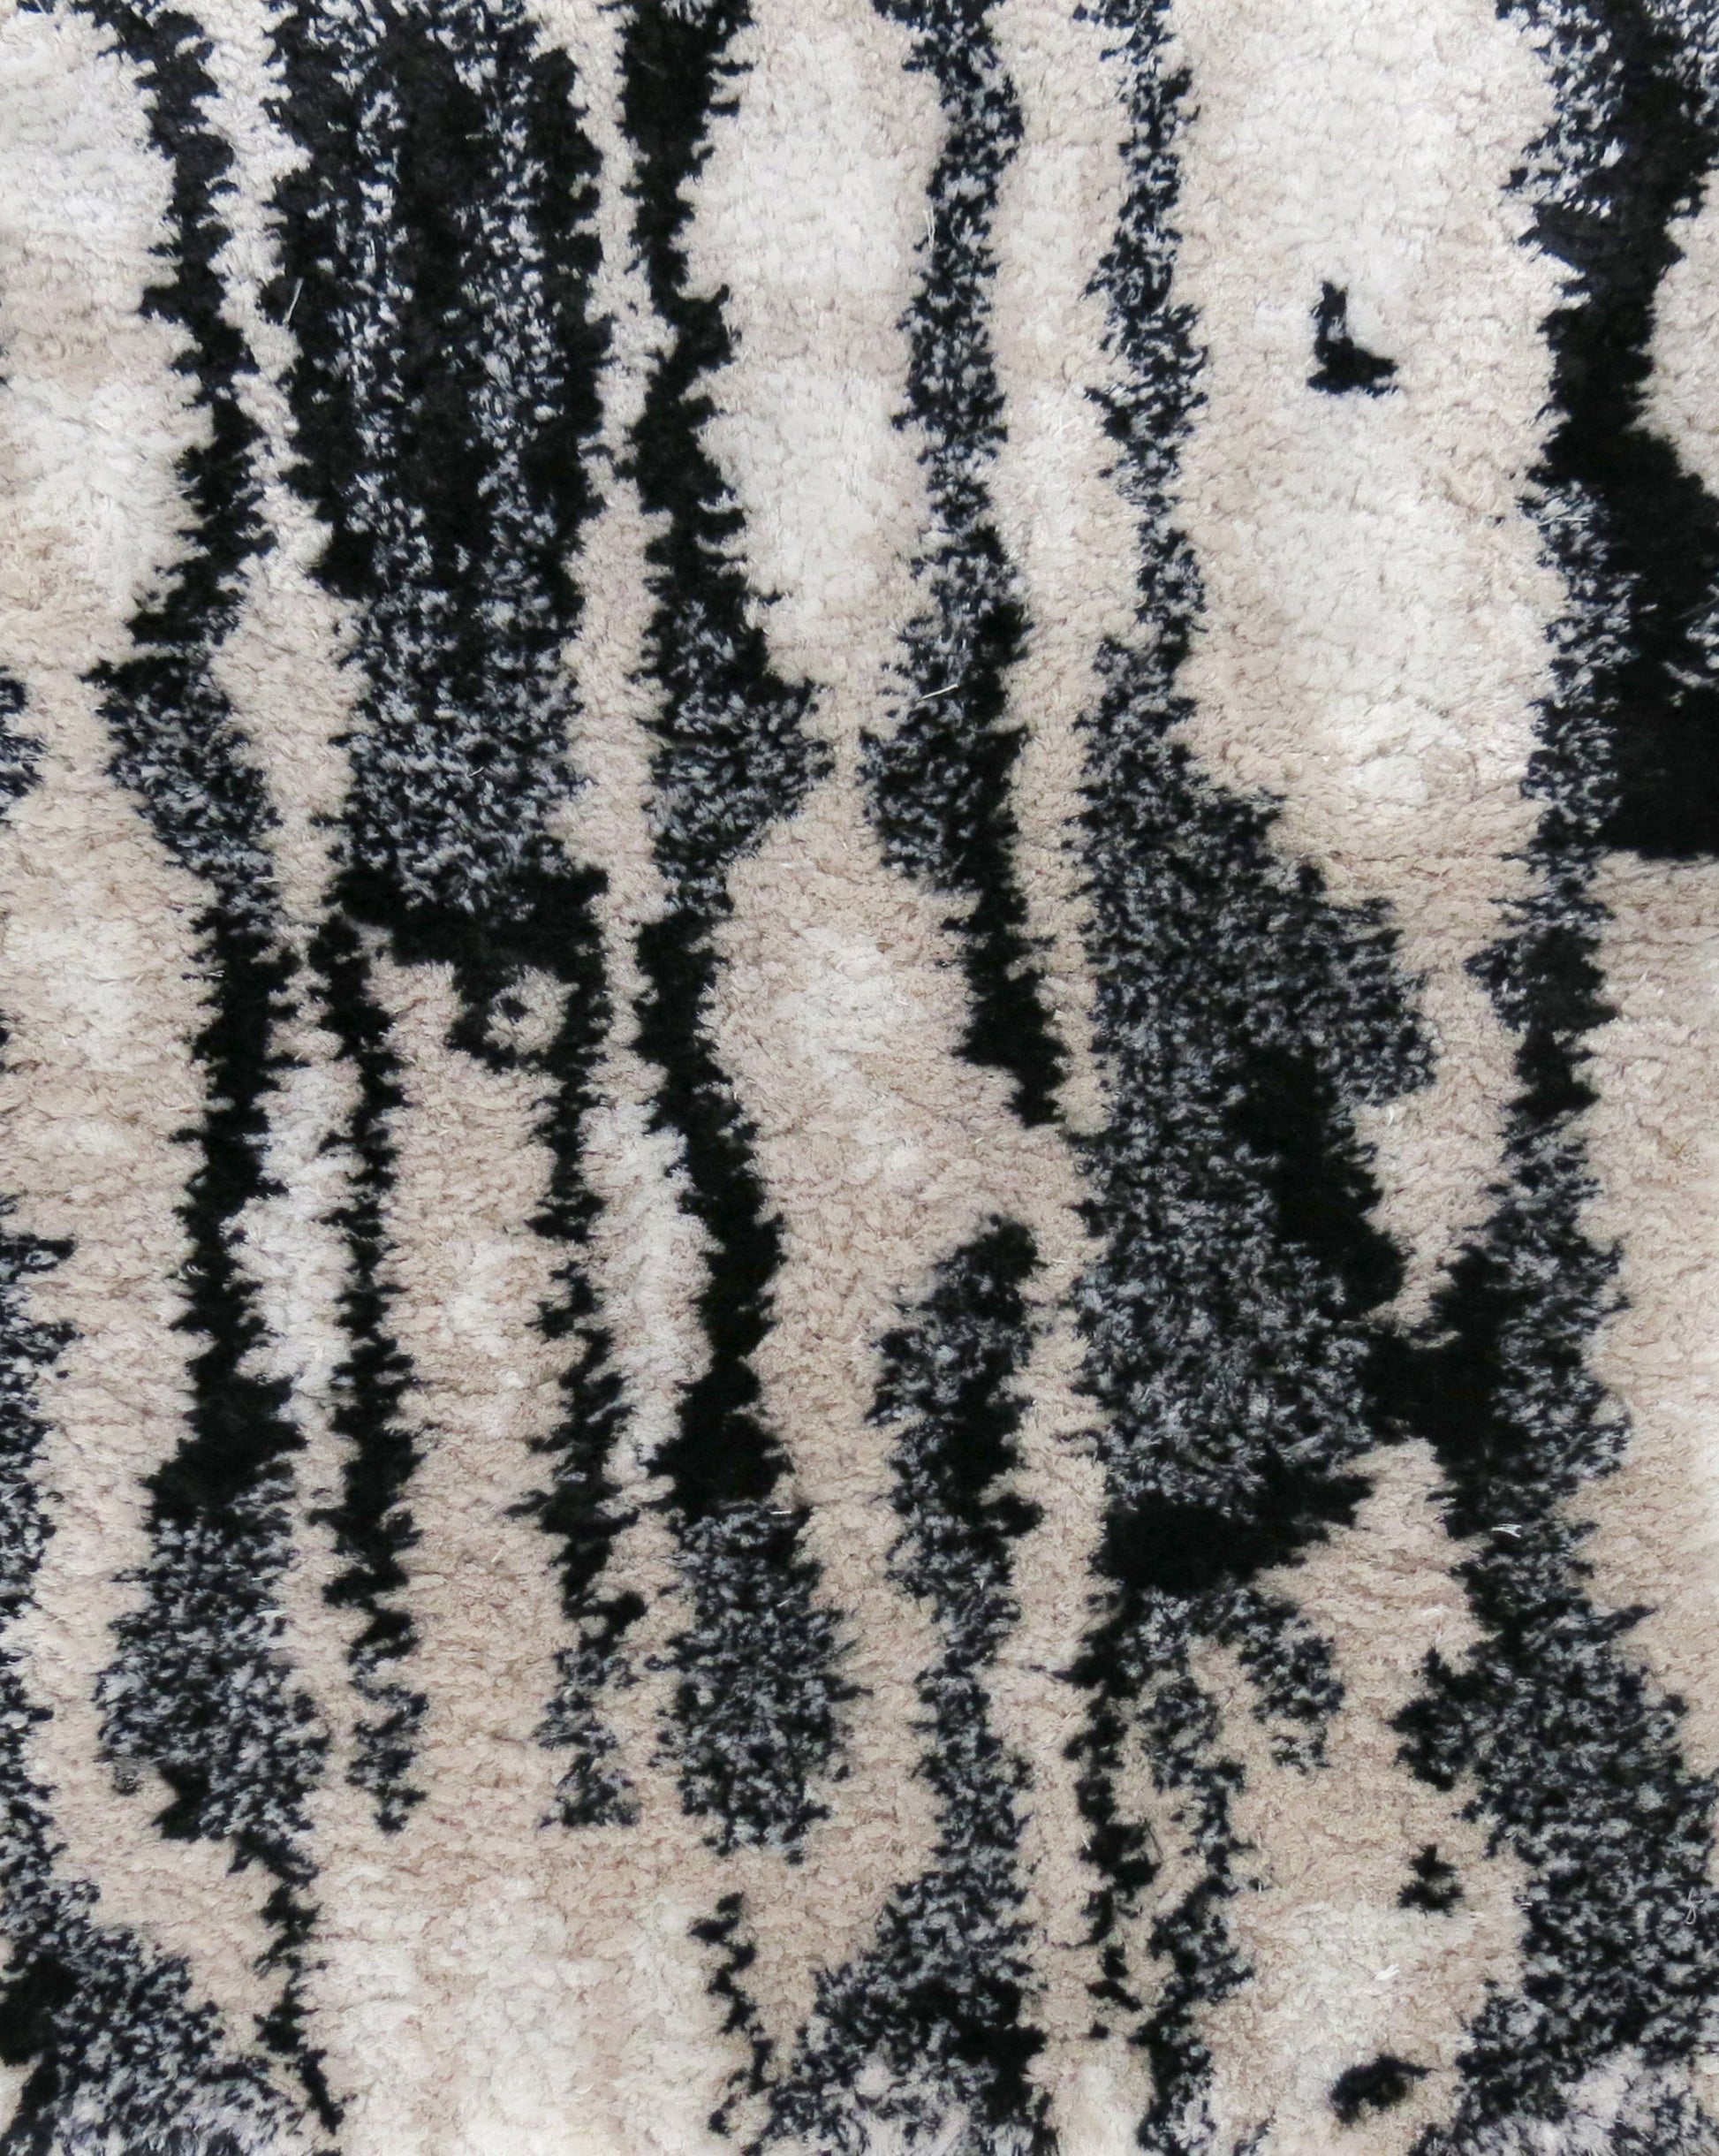 A close up image of a tactile Biami Hand Knotted Rug Black with a Biami pattern